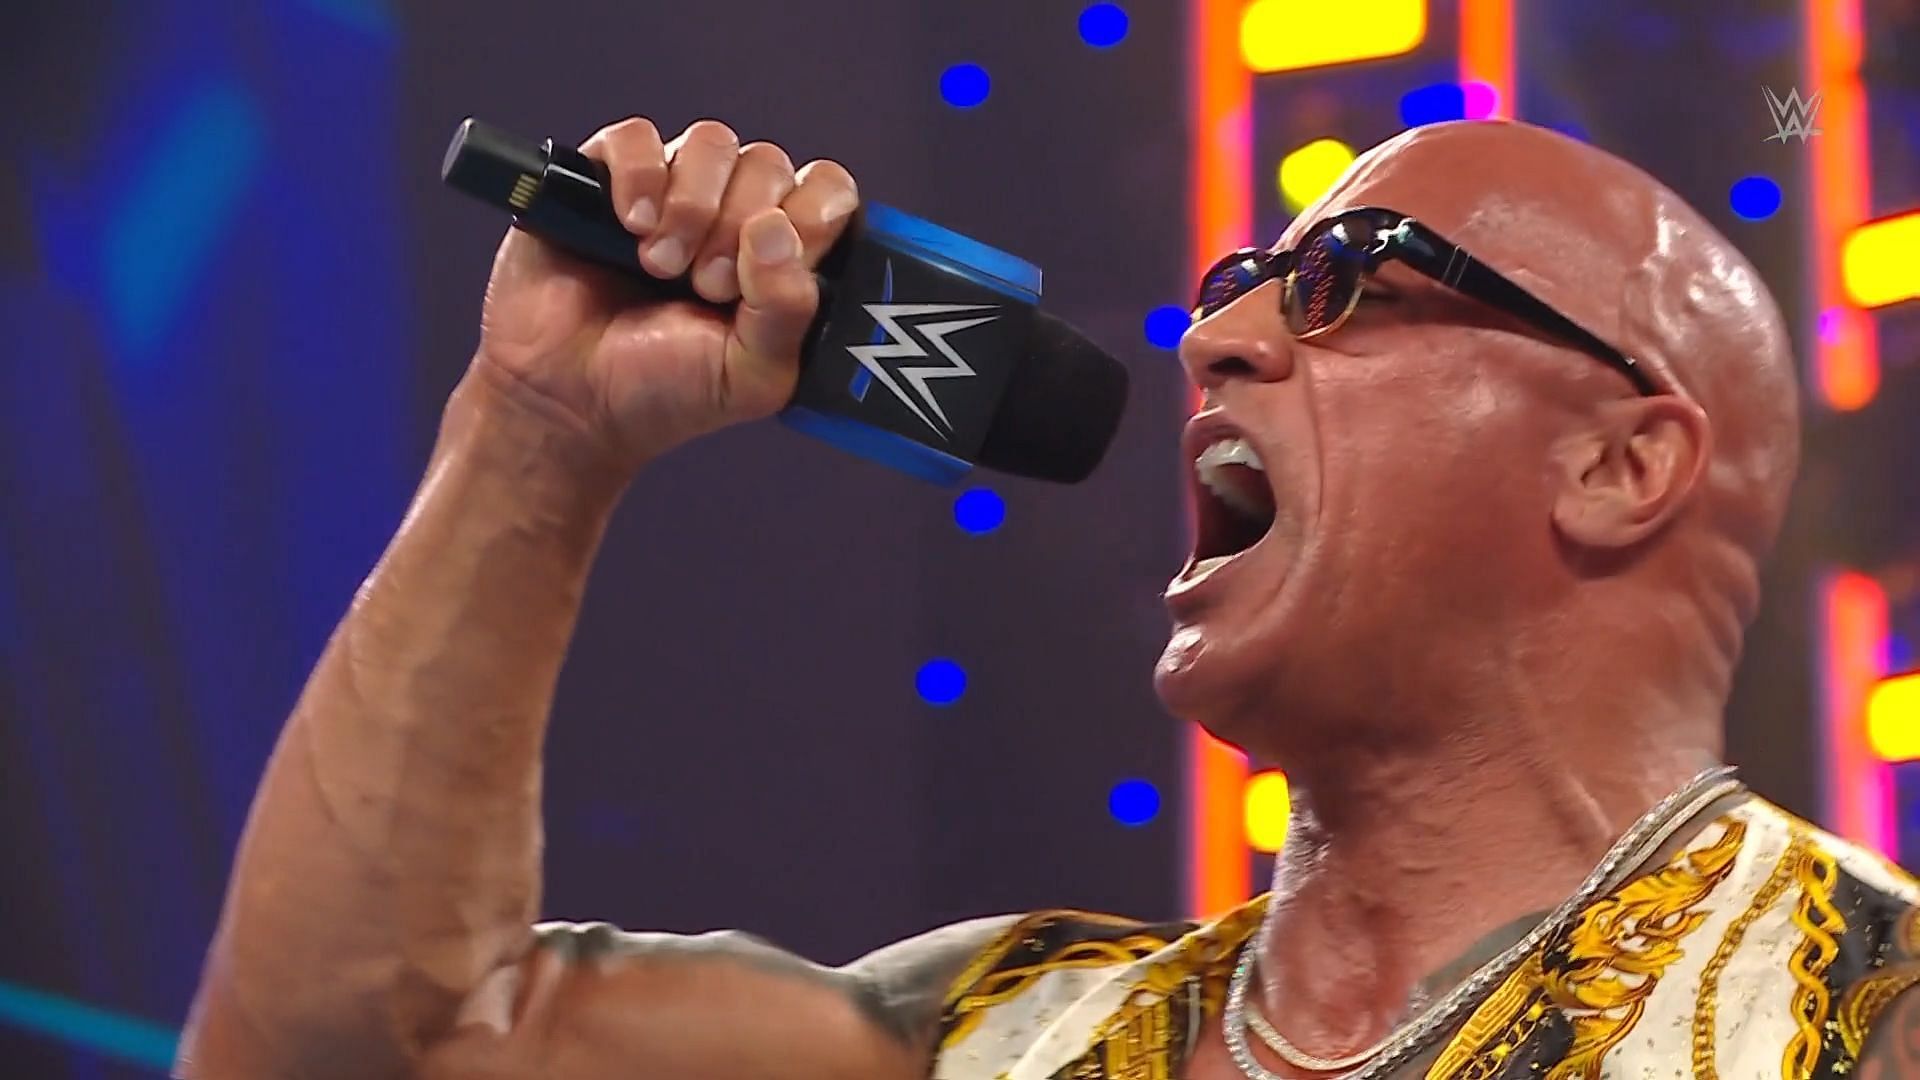 The Rock was in top form on SmackDown!